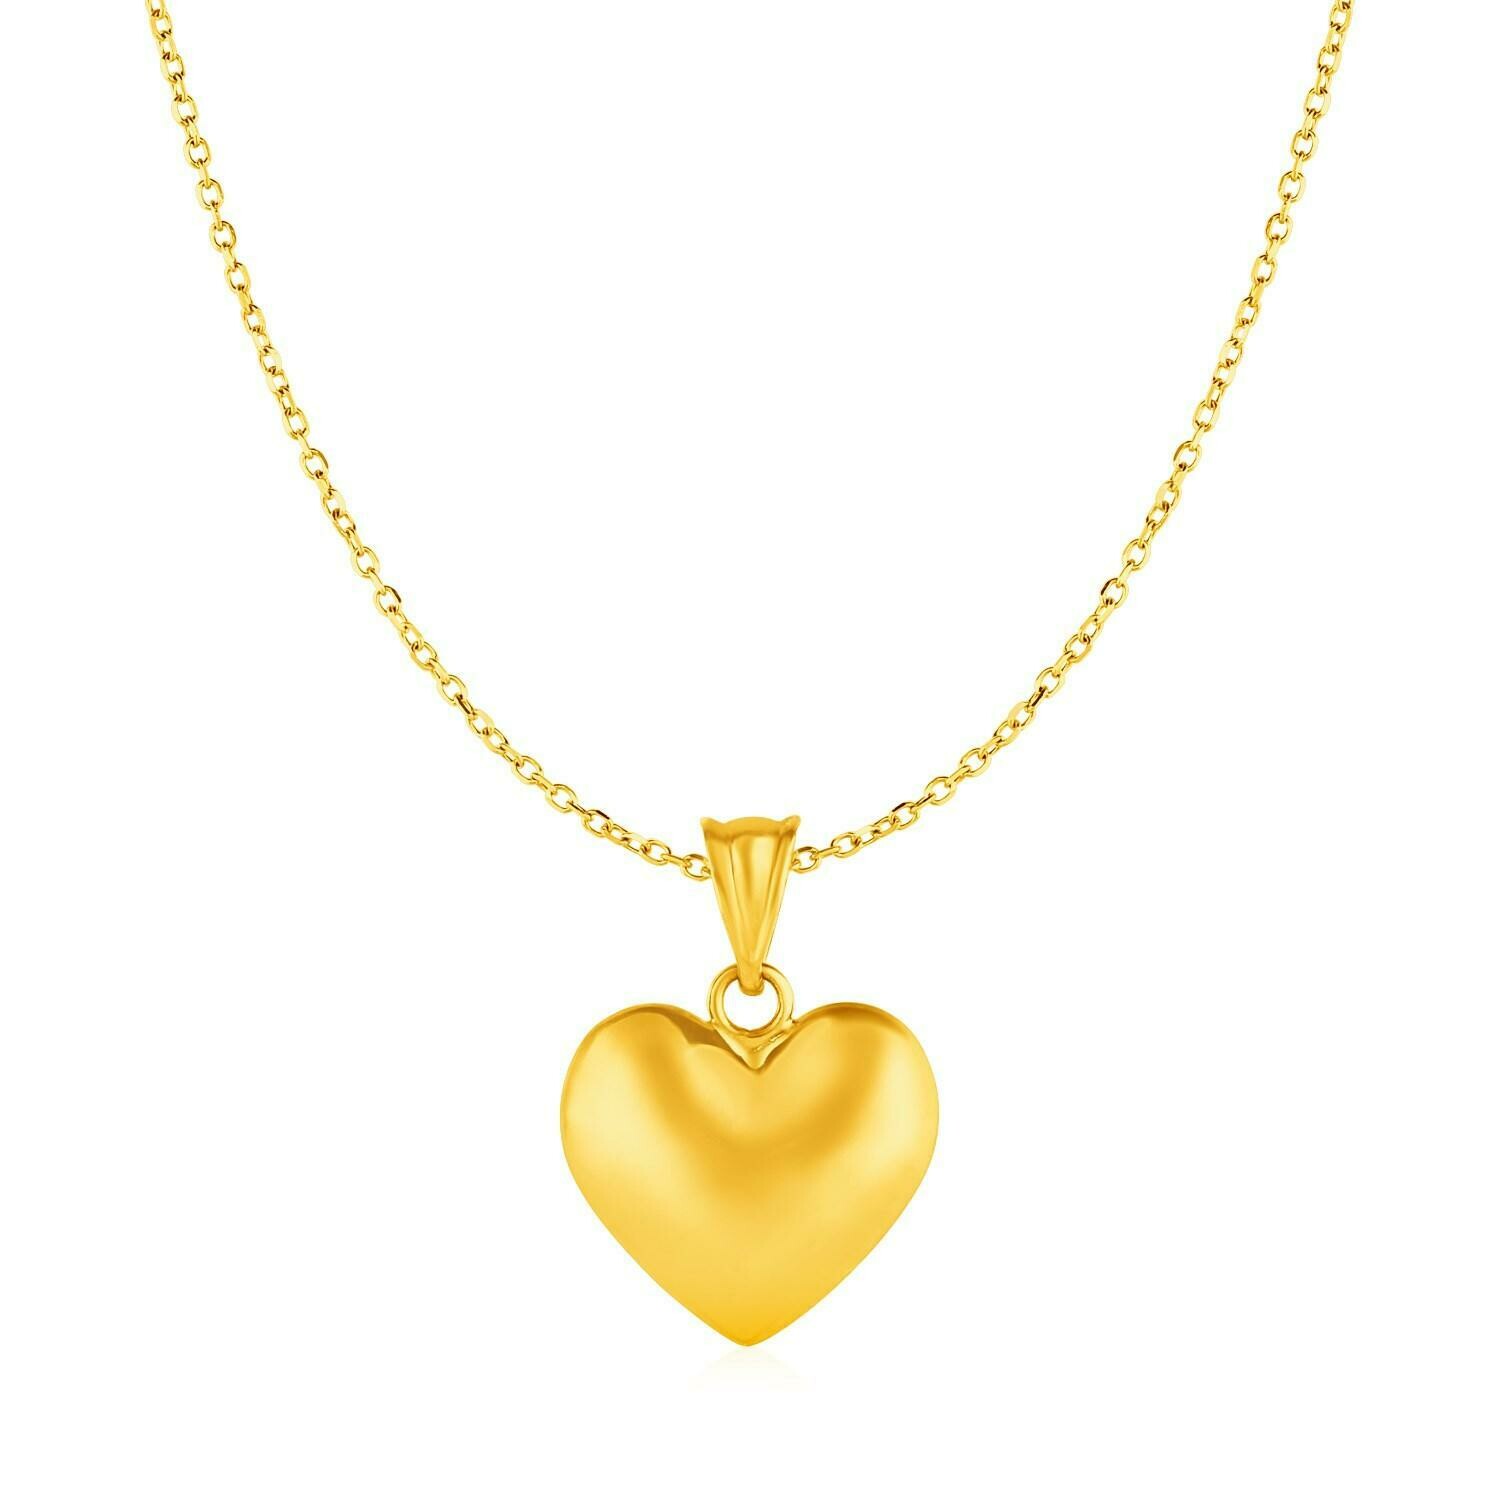 Puffed Heart Pendant in 10k Yellow Gold, Size: 18